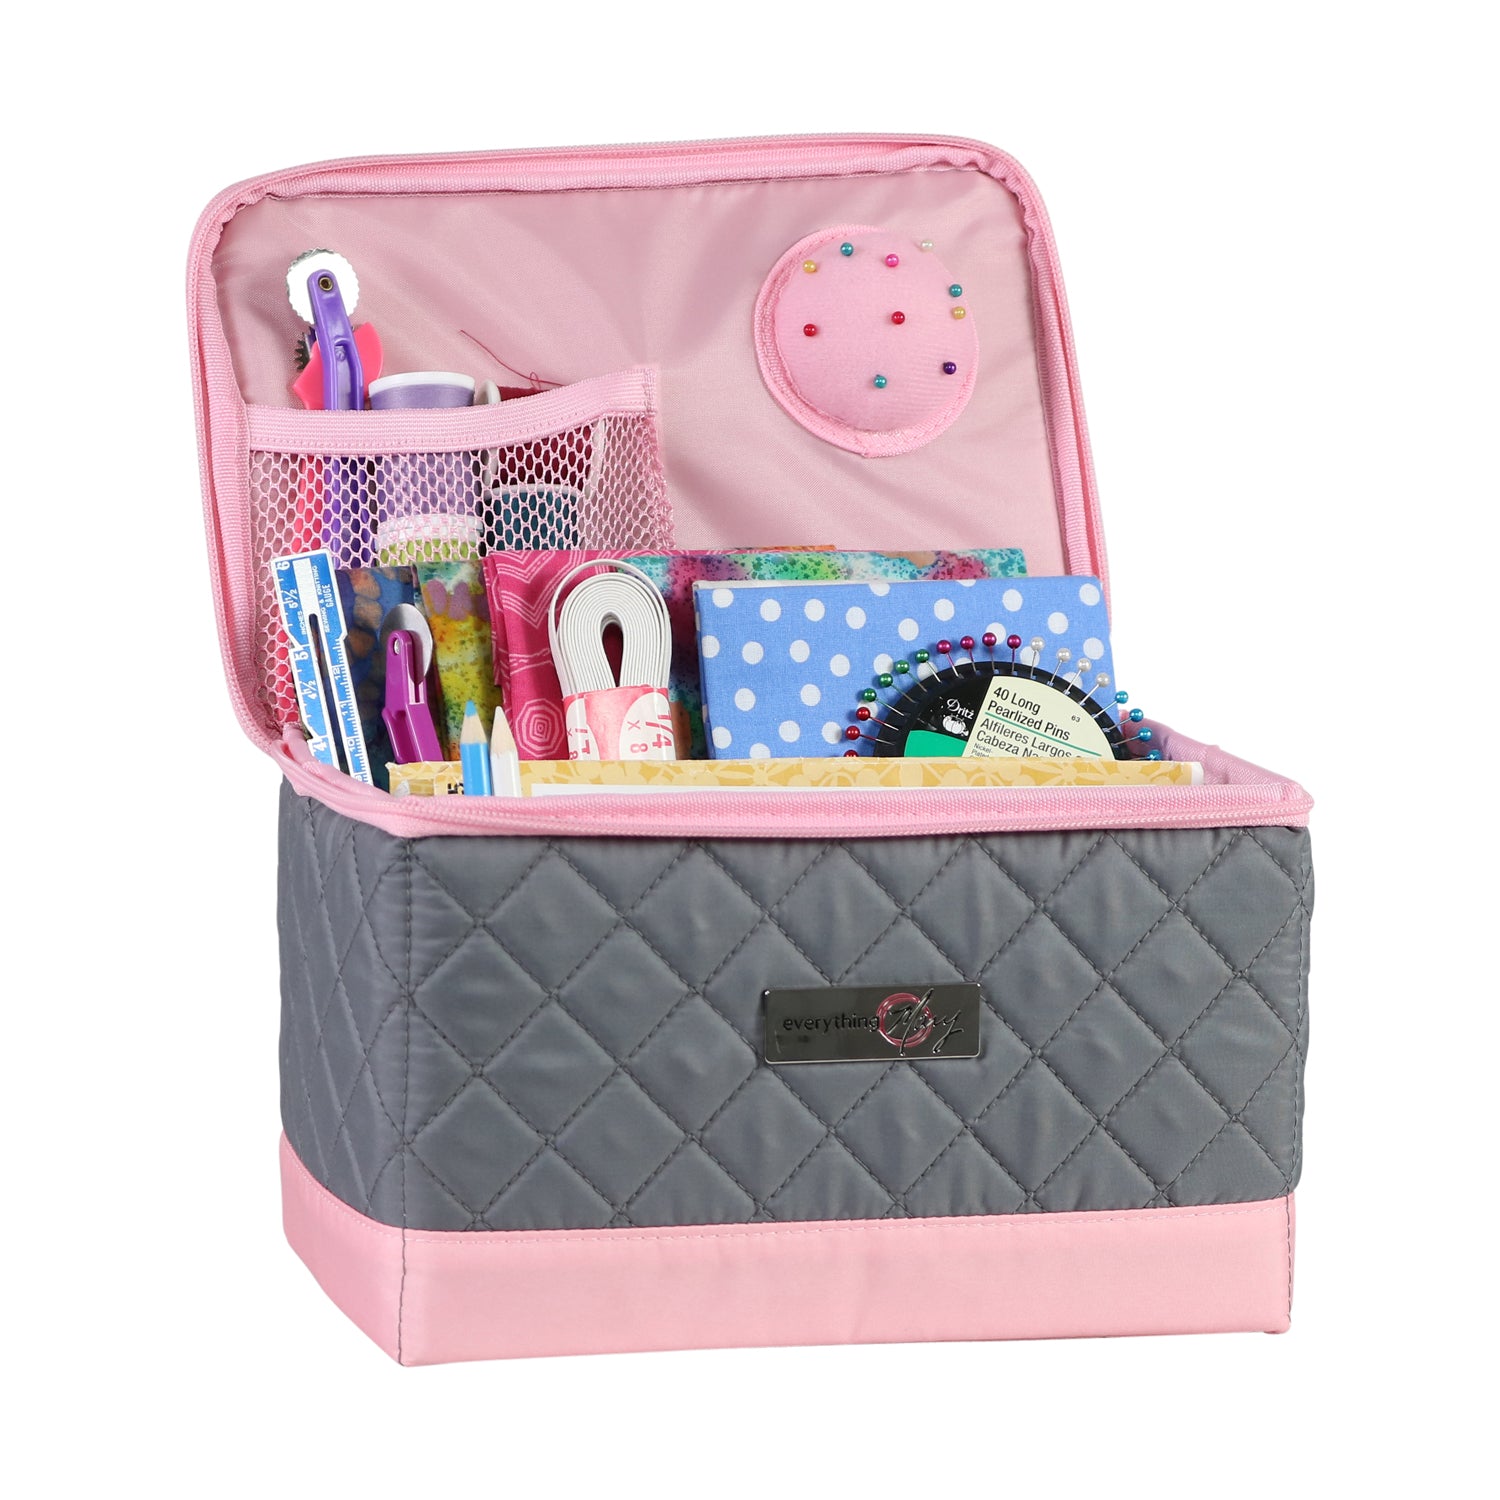 Medium Sewing Basket Sewing Storage and Organizer with Complete Sewing Kit  Accessories Included, Wooden Sewing Box Kit with Removable Tray and Tomato